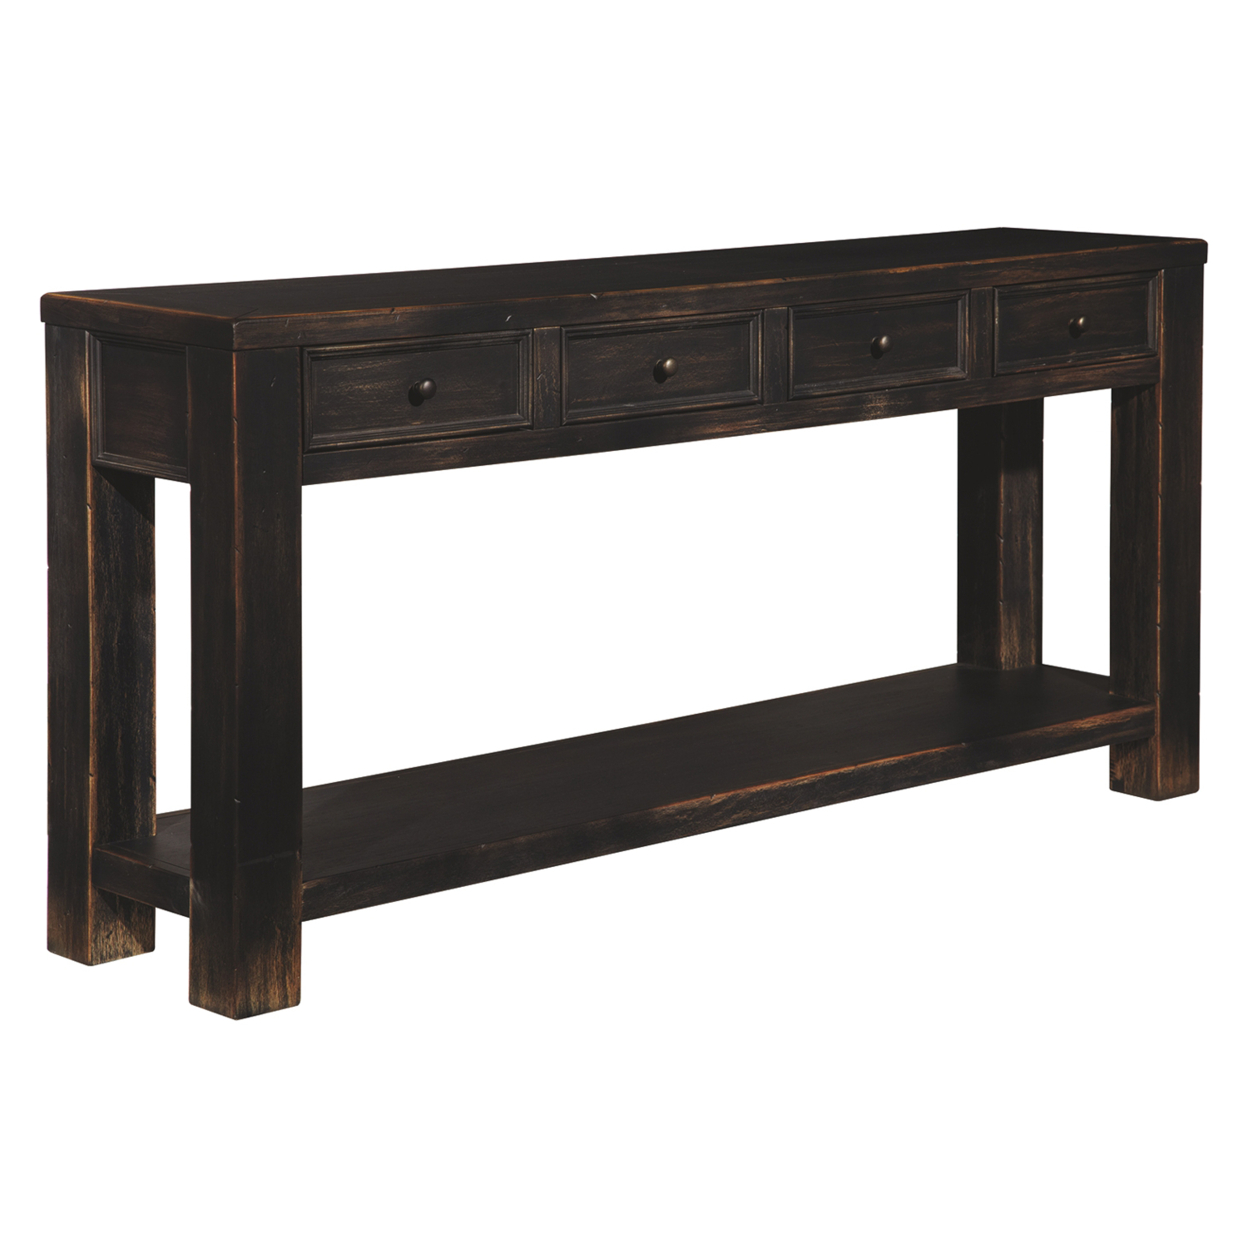 Wooden Sofa Table With Four Drawers And One Shelf, Weathered Black- Saltoro Sherpi